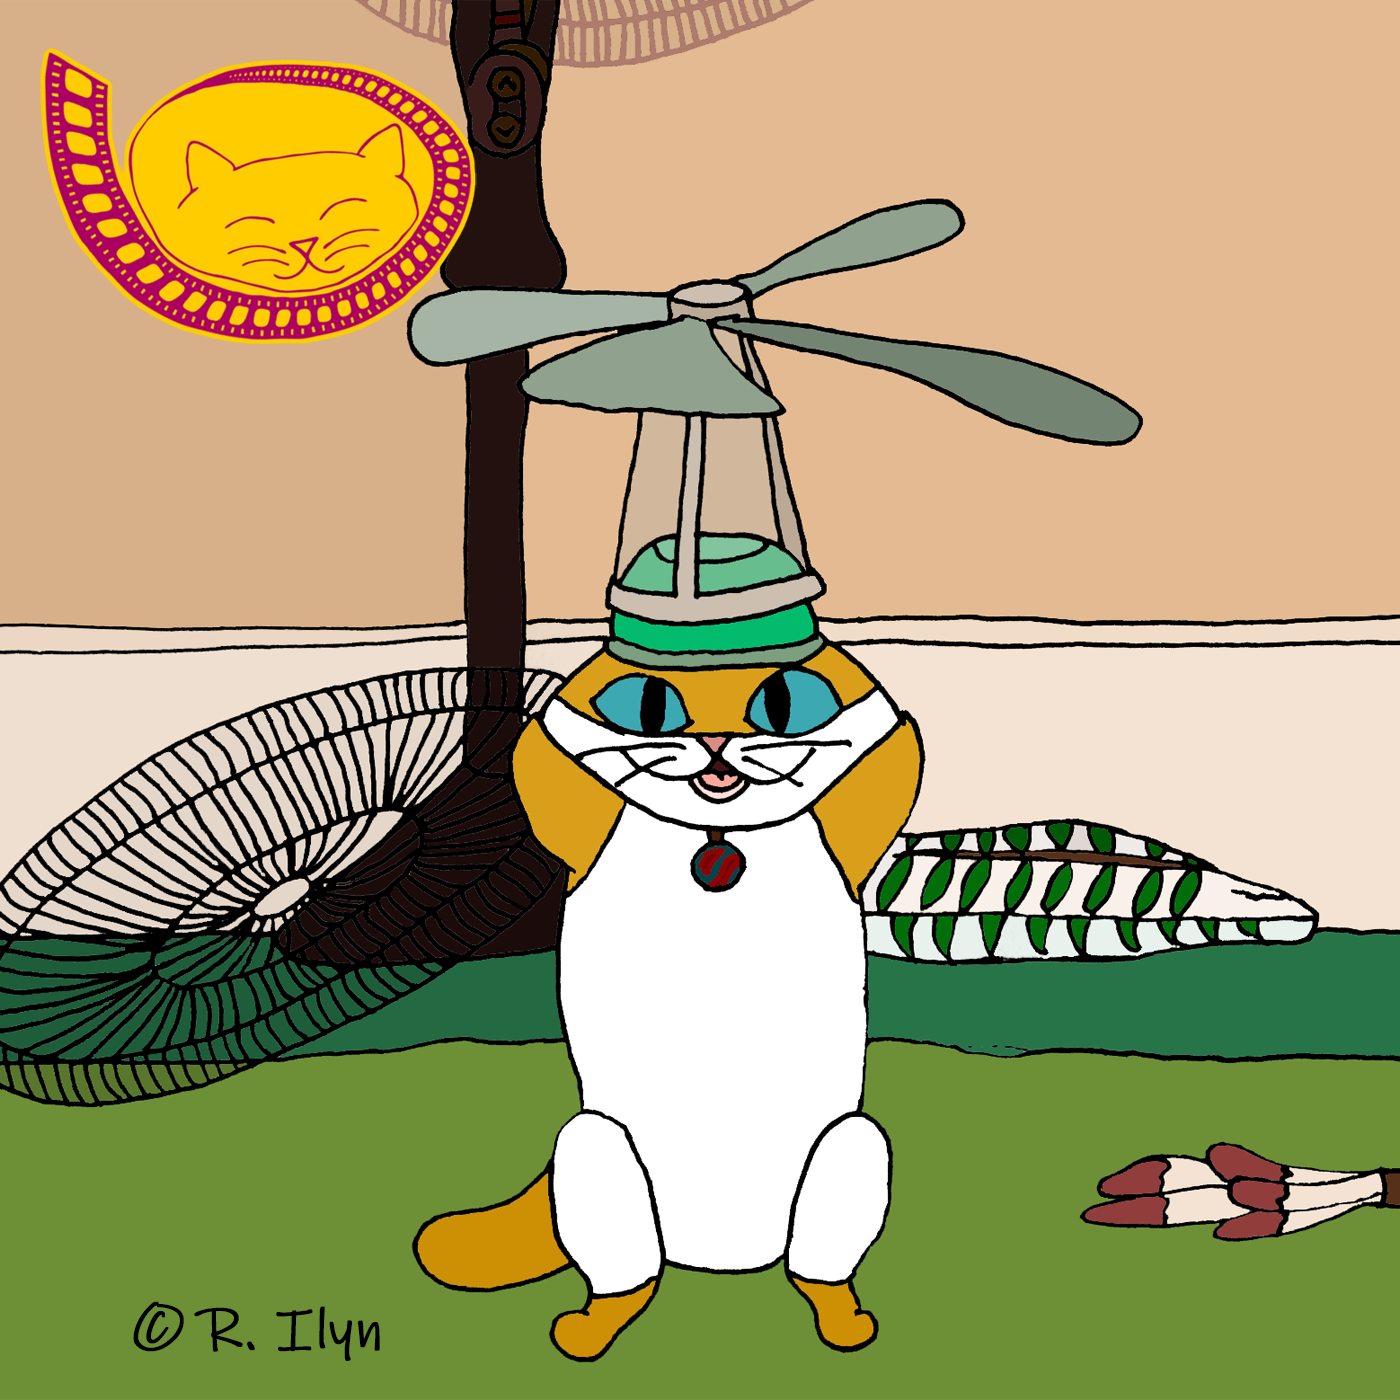 Illustration of cat Cape wearing a propeller hat in the movie Cats.